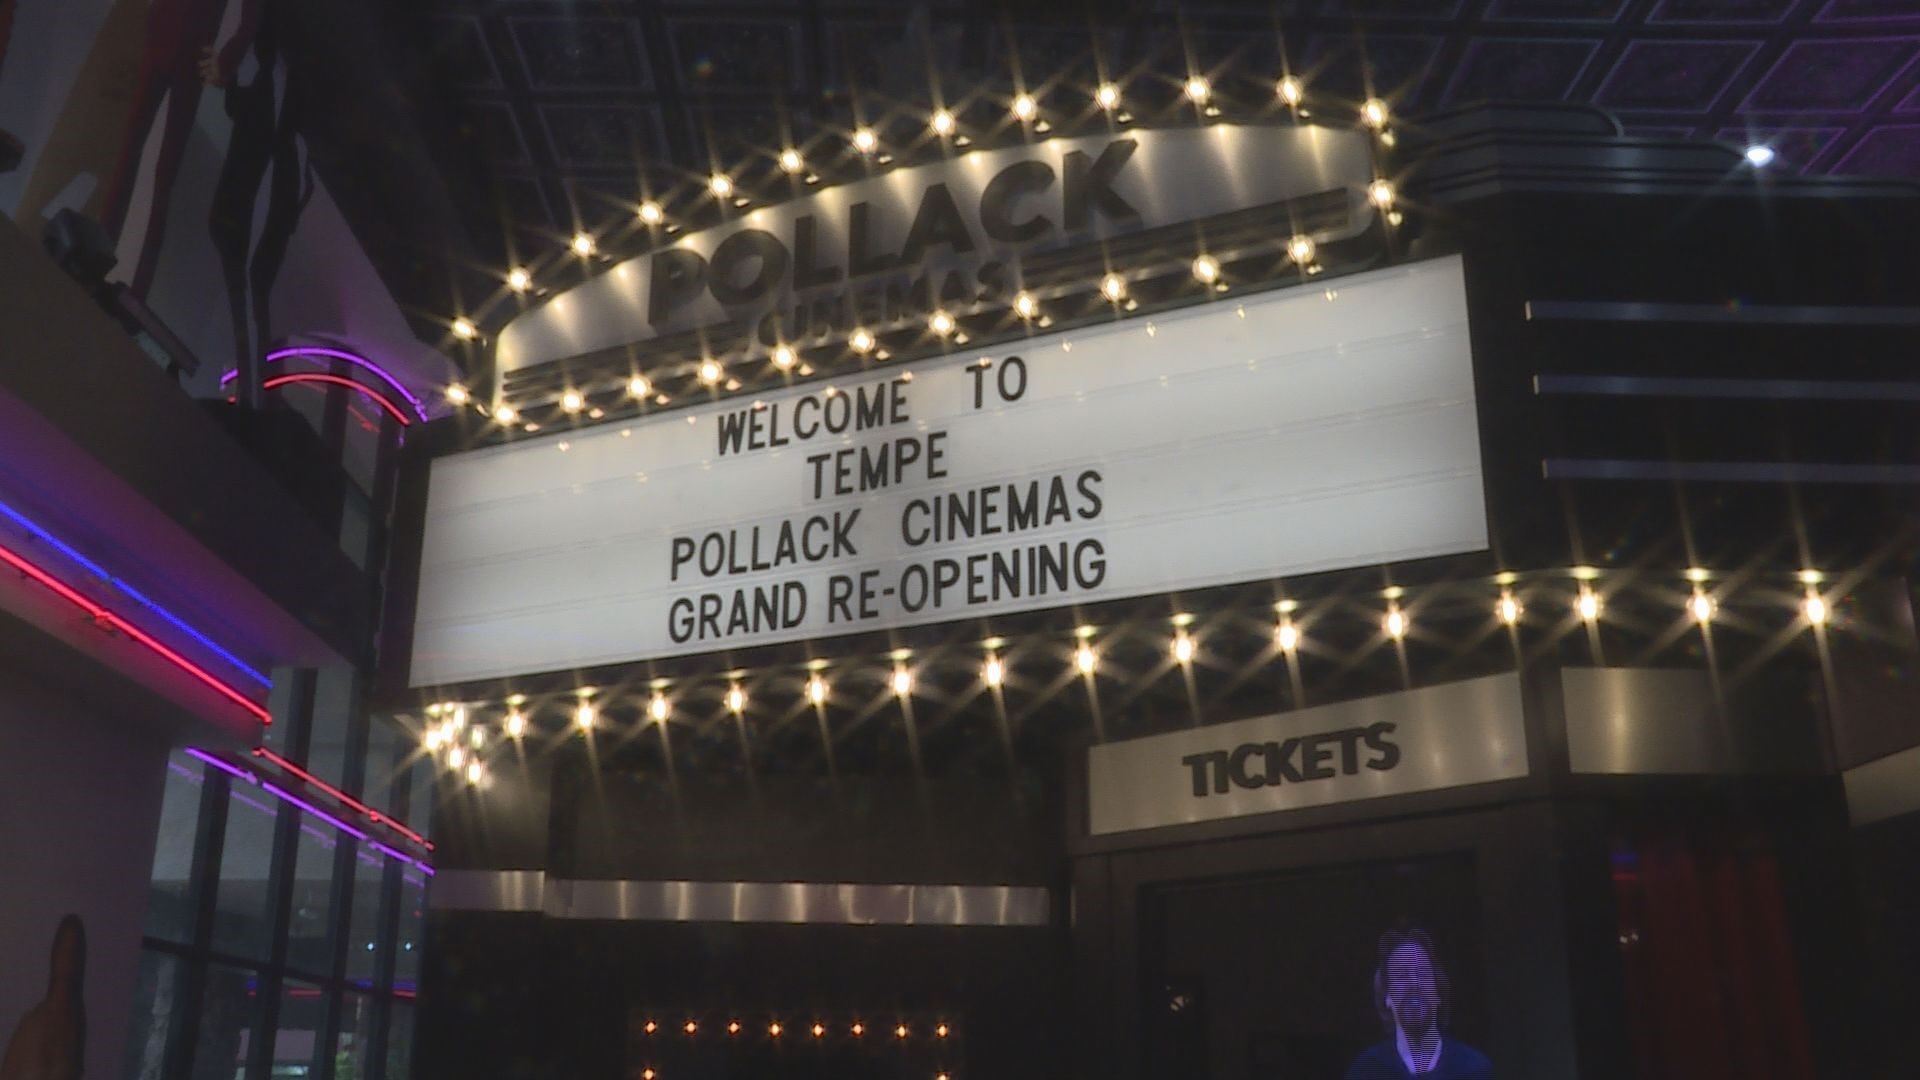 Pollack Cinemas in Tempe has been sitting quietly for the past 20 months. Now, it’s set to re-open on December 10 after nearly two years of renovations.